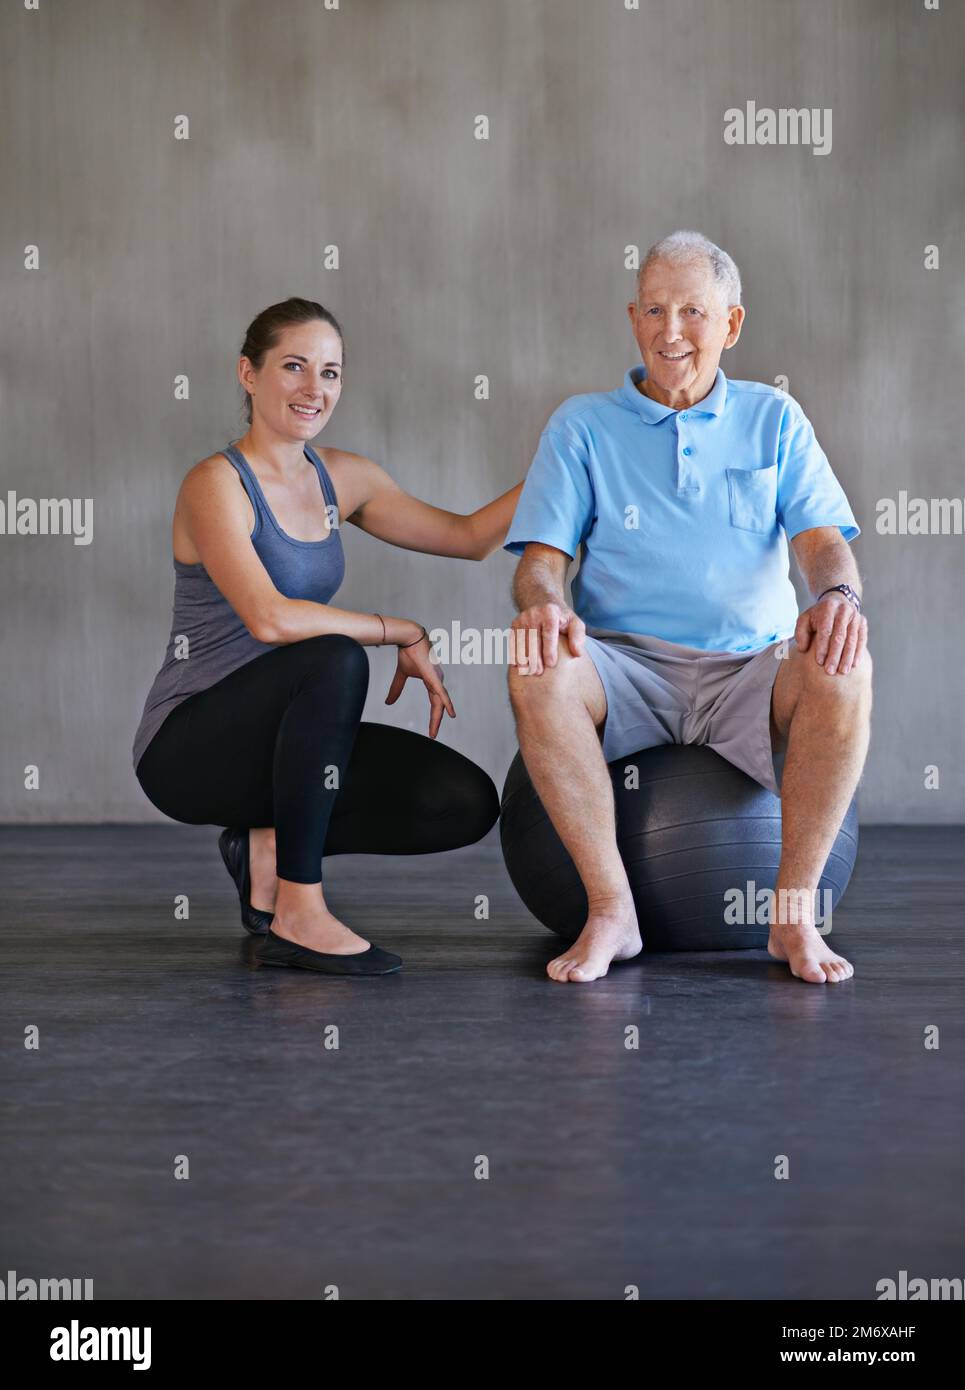 Helping him get back to his old self. a a physical therapist working with a senior man. Stock Photo